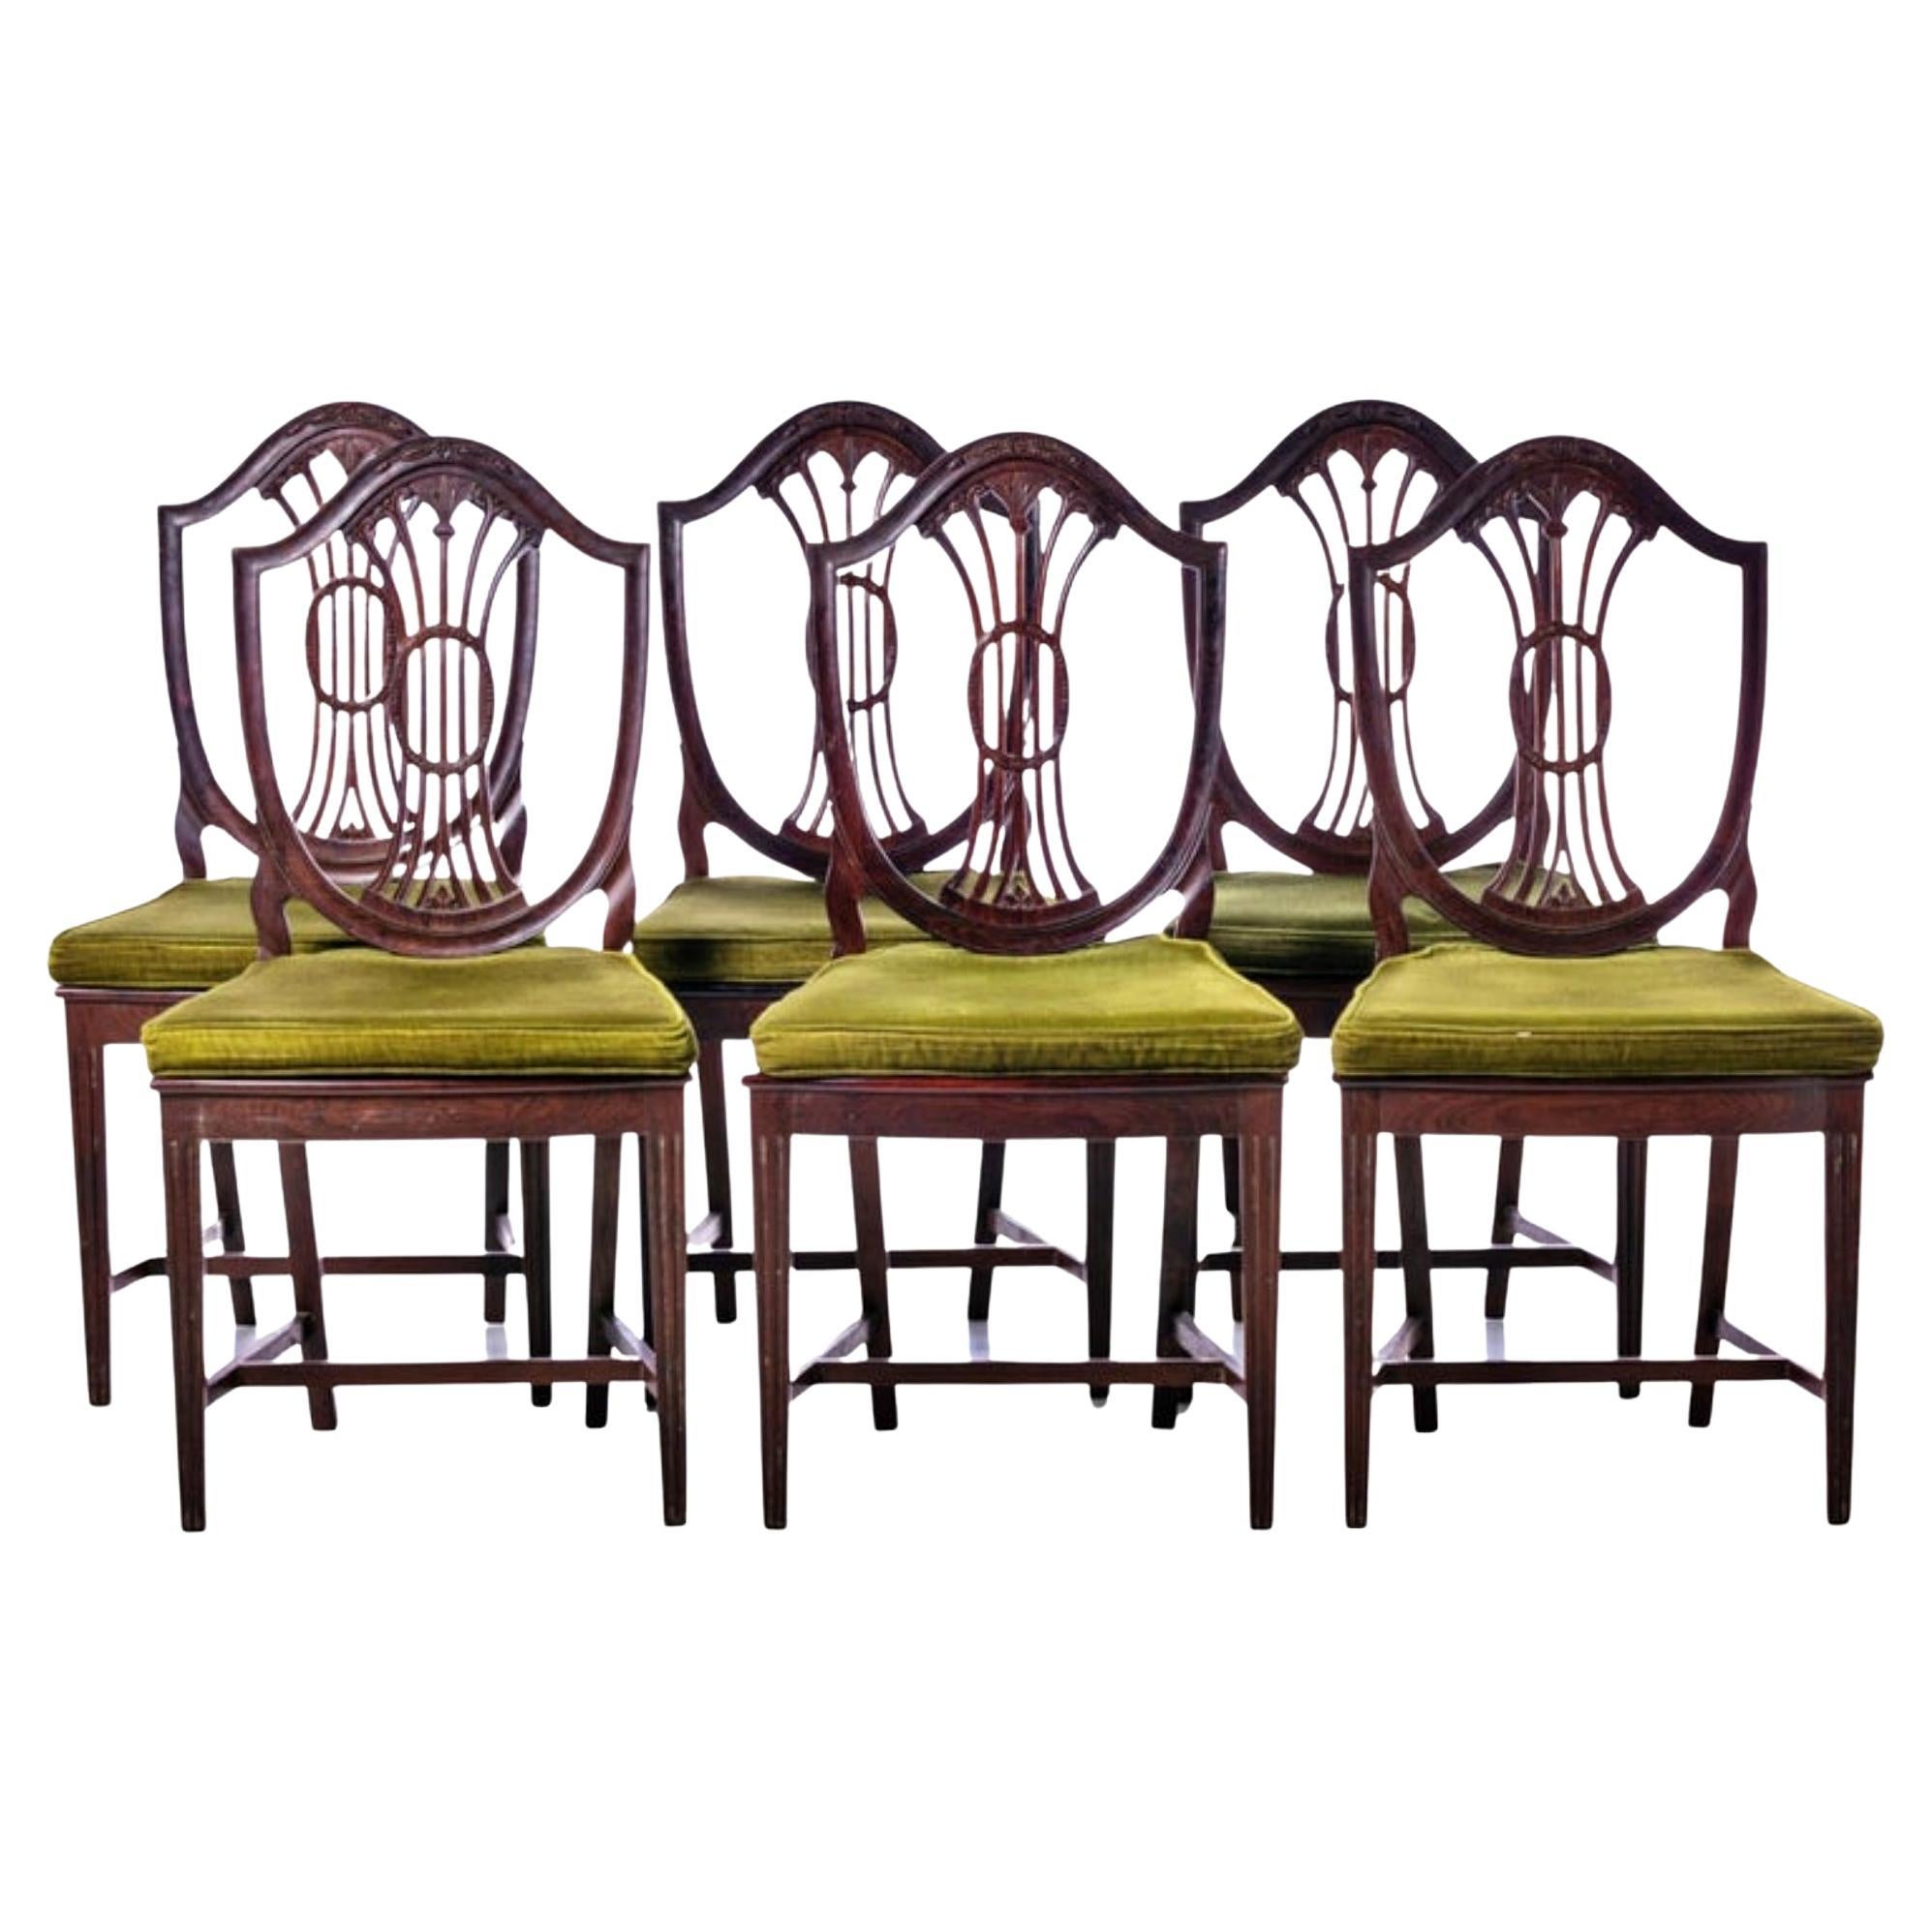 Lot of 6 Chairs Portuguese 19th Century in Brazilian Rosewood